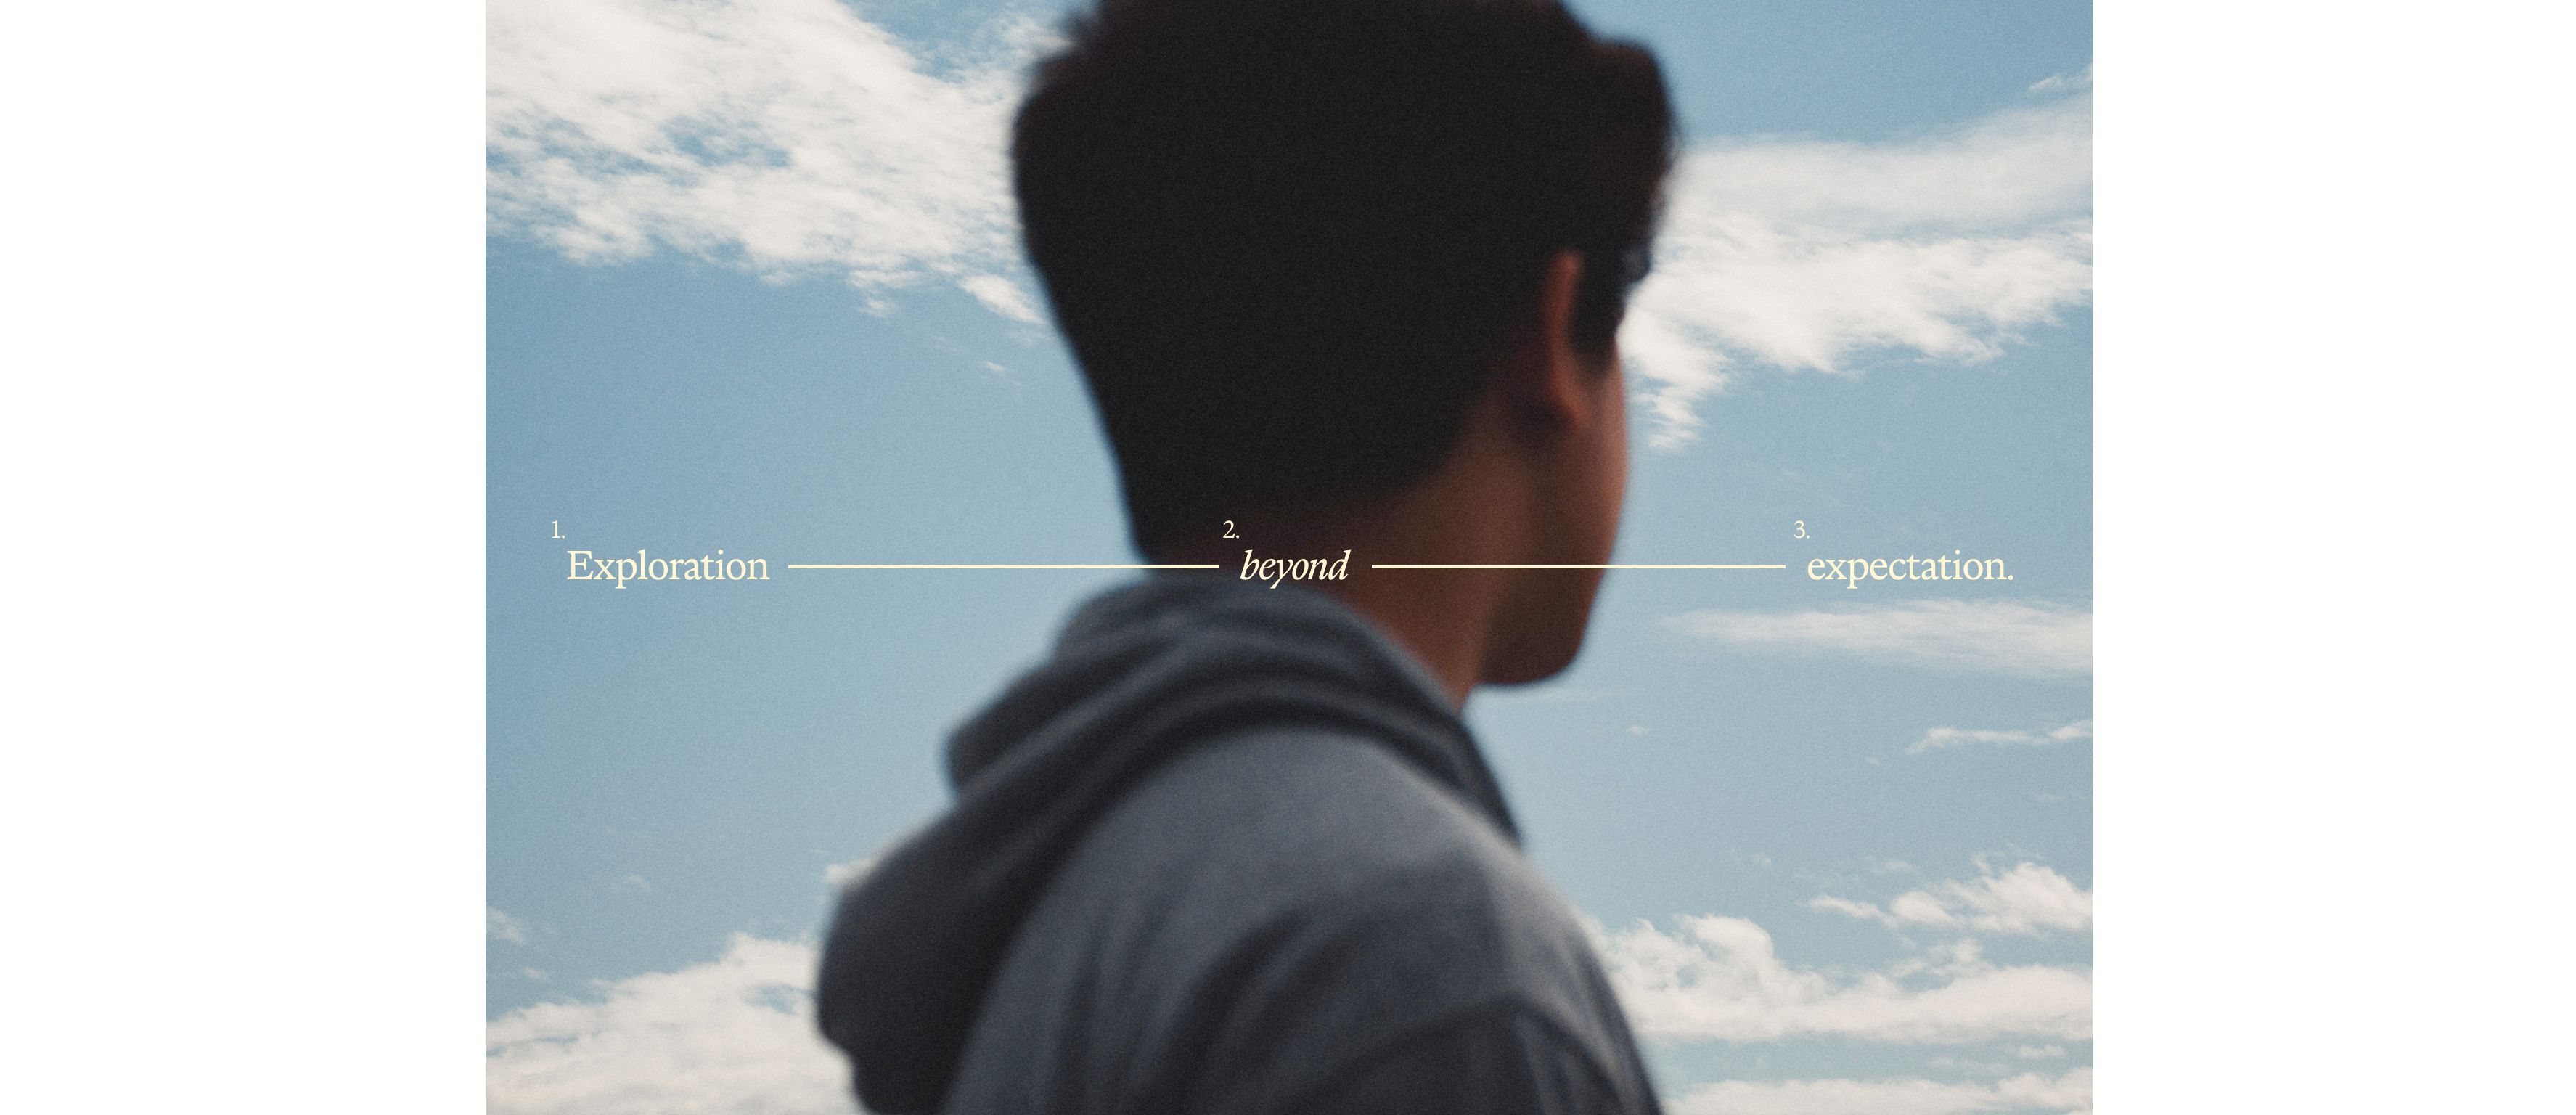 Exploration beyond expectation text shown over a photograph of a man